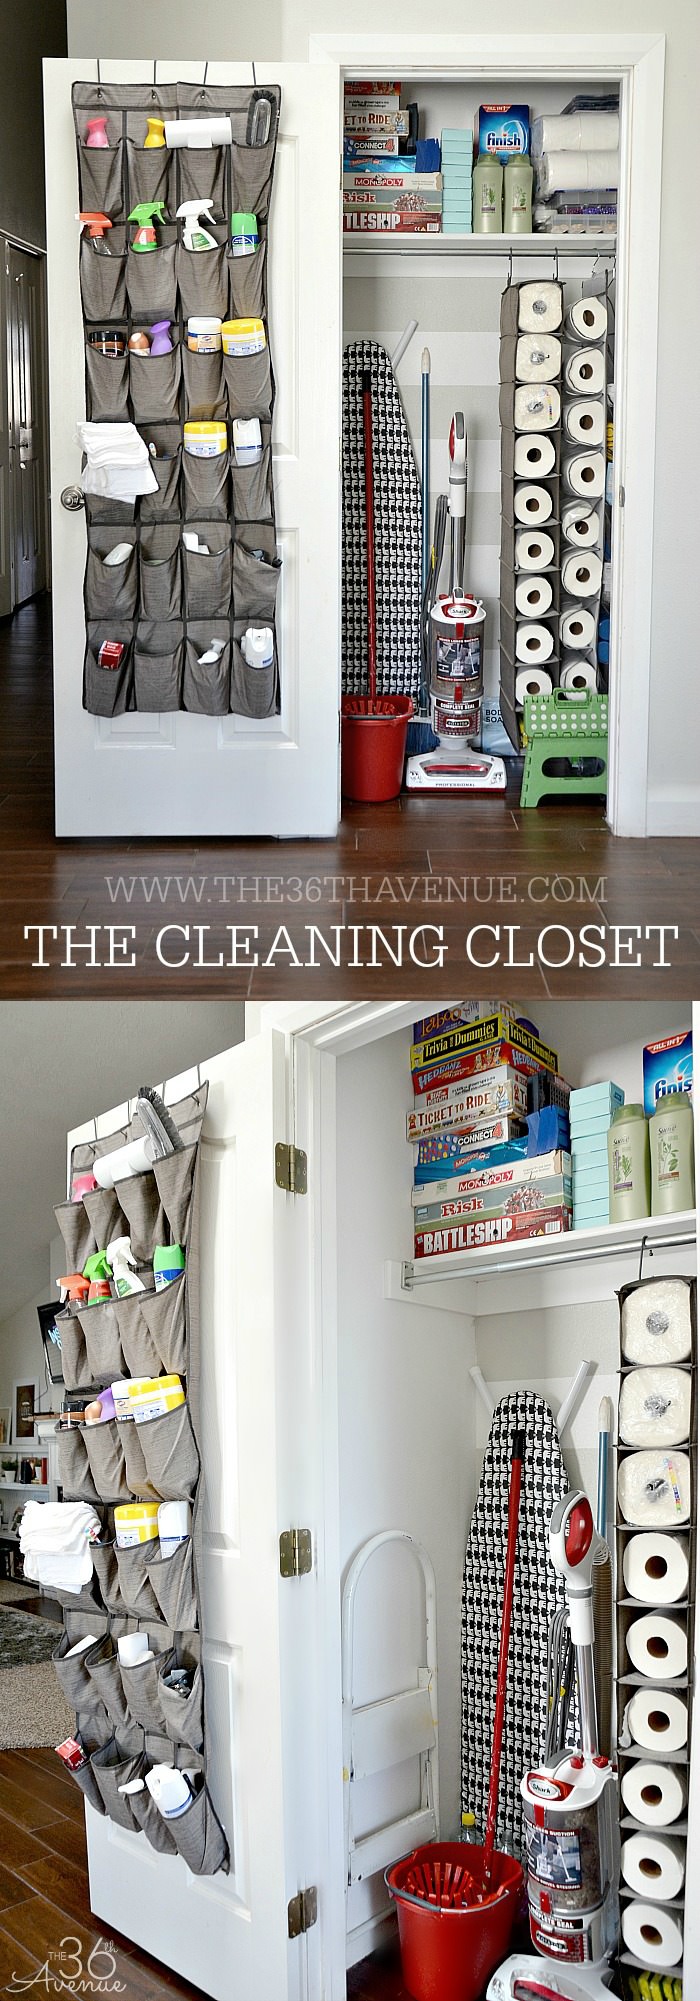 With these best organizing ideas in this post, you can organize your things neatly and efficiently. Check out!